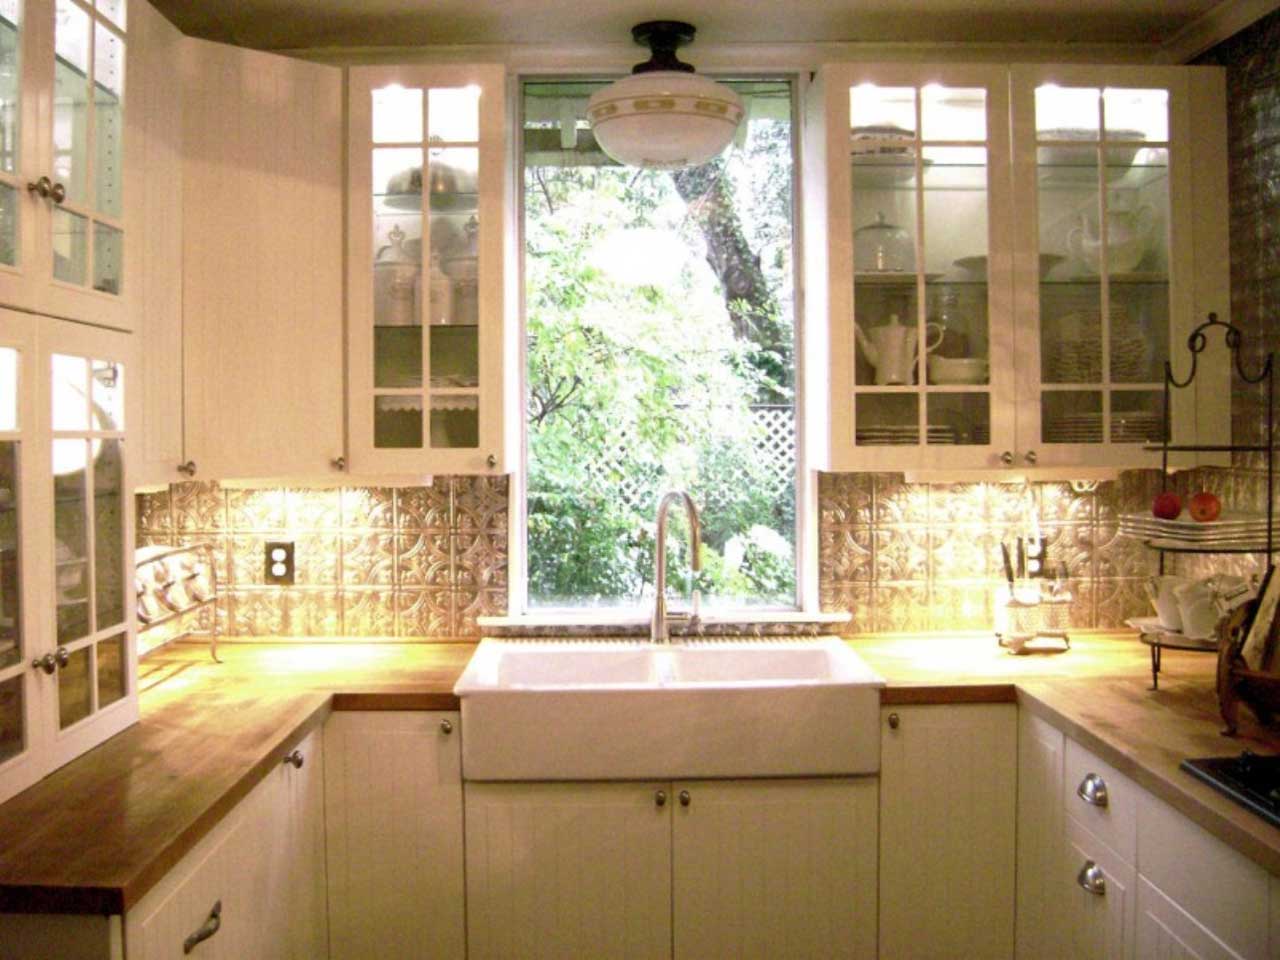 Remodel Ideas Home Kitchen Remodel Ideas For Small Home Designs With Rustic Teak Wood Countertops DIY Idea And Elegant White Kitchen Cabinets Design Also Natural Floral Pattern Backsplash Decoration Kitchen Most Popular Kitchen Layout To Emulate Your Own After